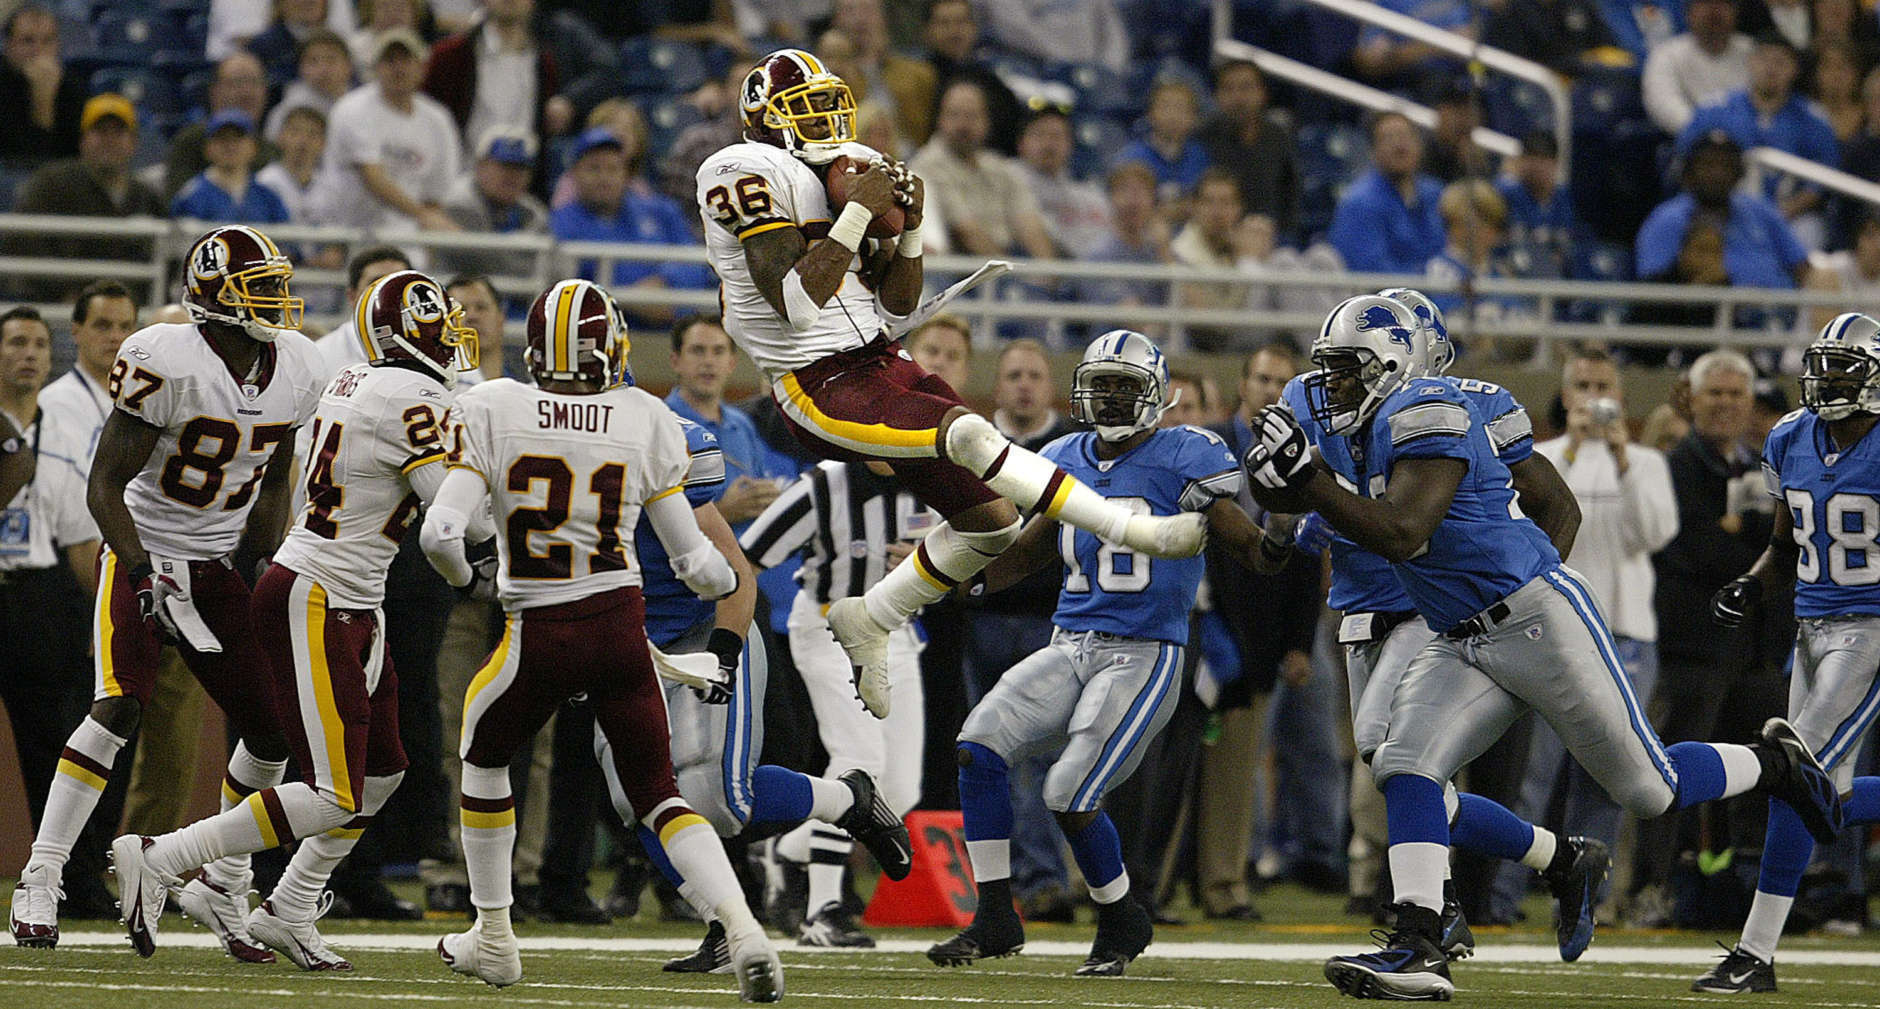 DETROIT - NOVEMBER 7:  Sean Taylor #36 of the Washington Redskins recovers an onside kick late in the fourth quarter against the Detroit Lions at Ford Field November 7, 2004 in Detroit, Michigan. The Redskins won, 17-10.  (Photo by Tom Pidgeon/Getty Images)